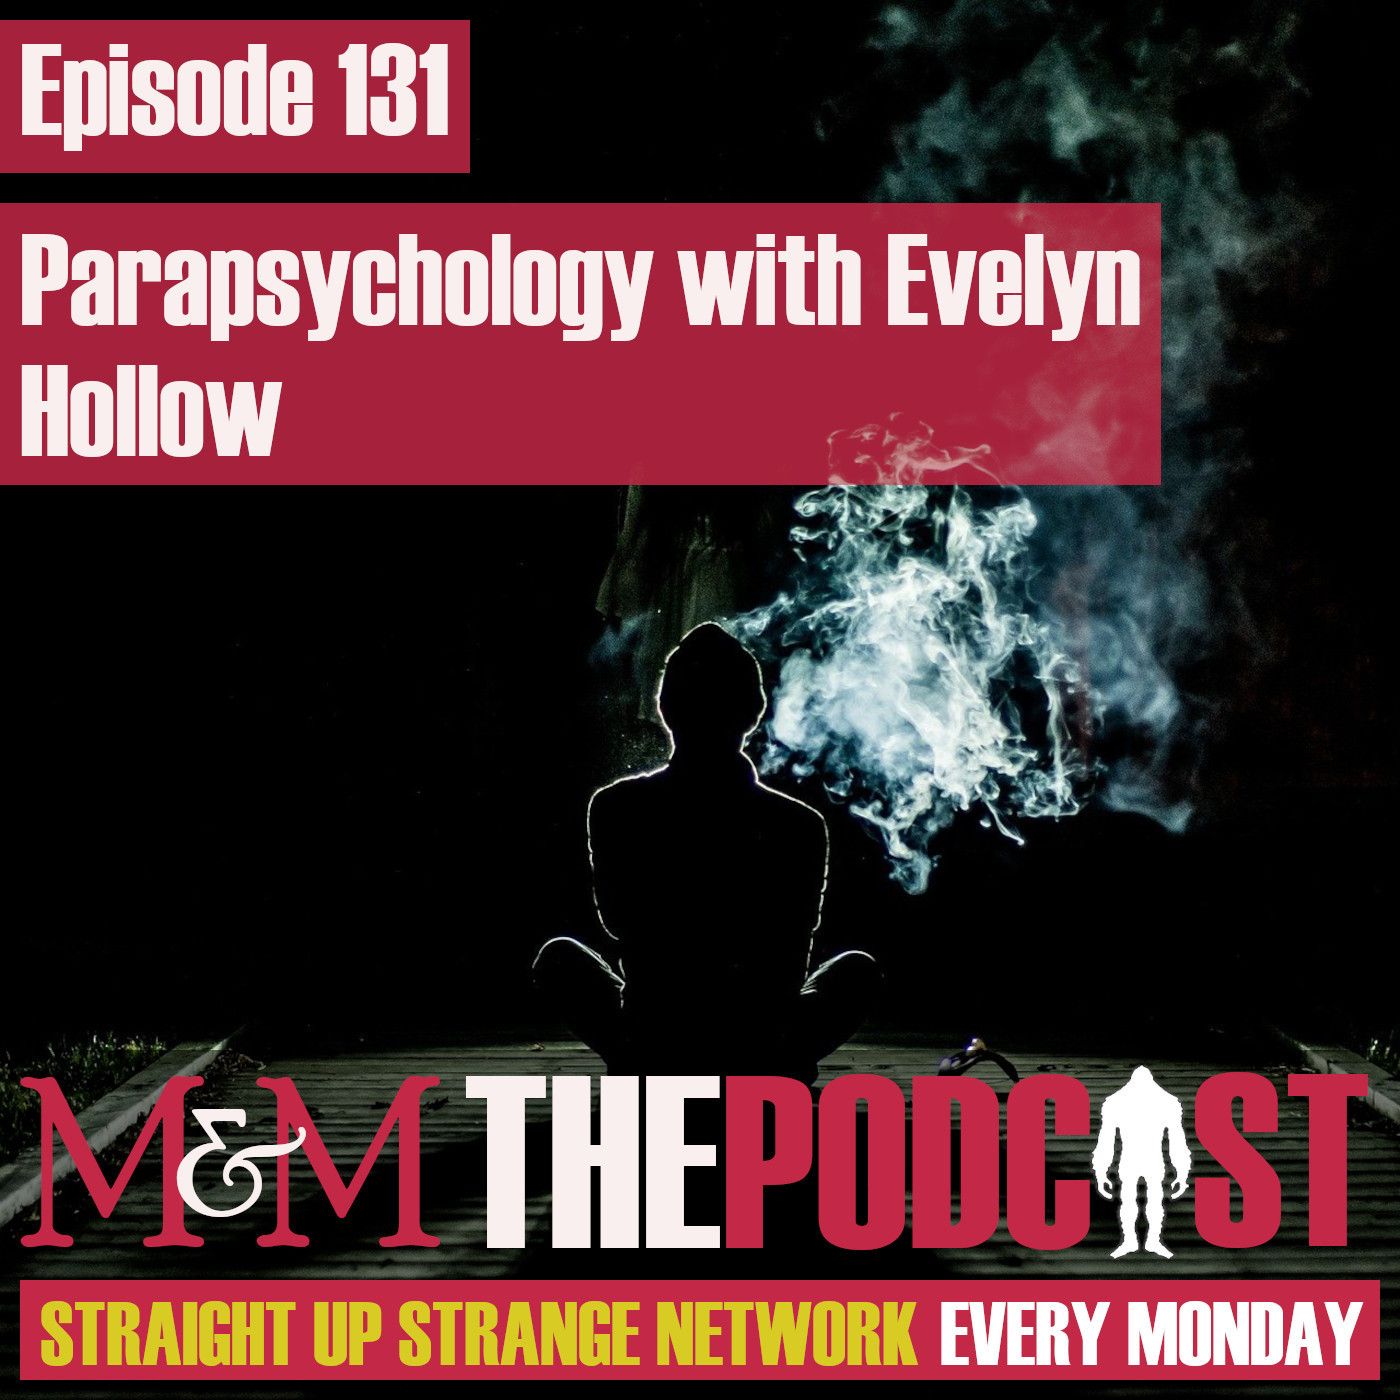 Mysteries and Monsters: Episode 131 Parapsychologist Evelyn Hollow